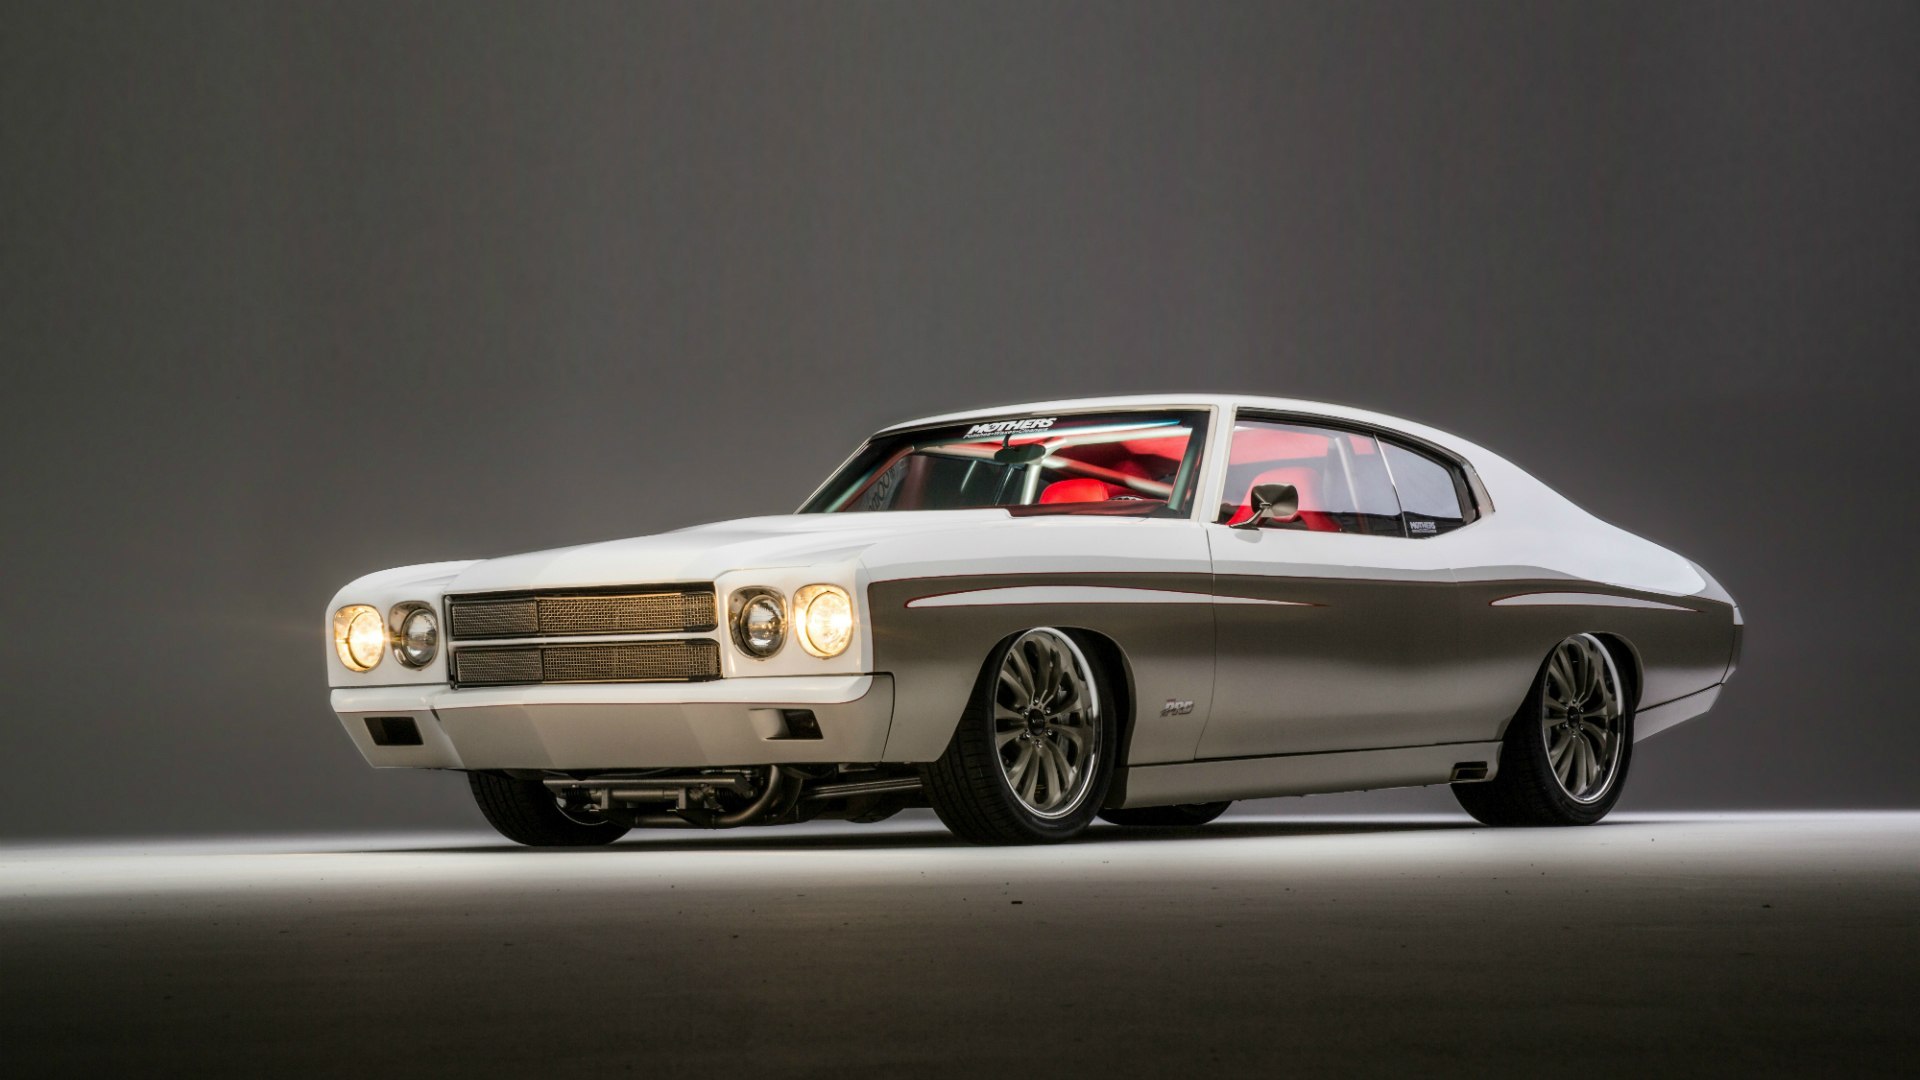 chevrolet, Chevelle, Ss, Beautiful, Car, Muscle, Car, Tuning Wallpaper